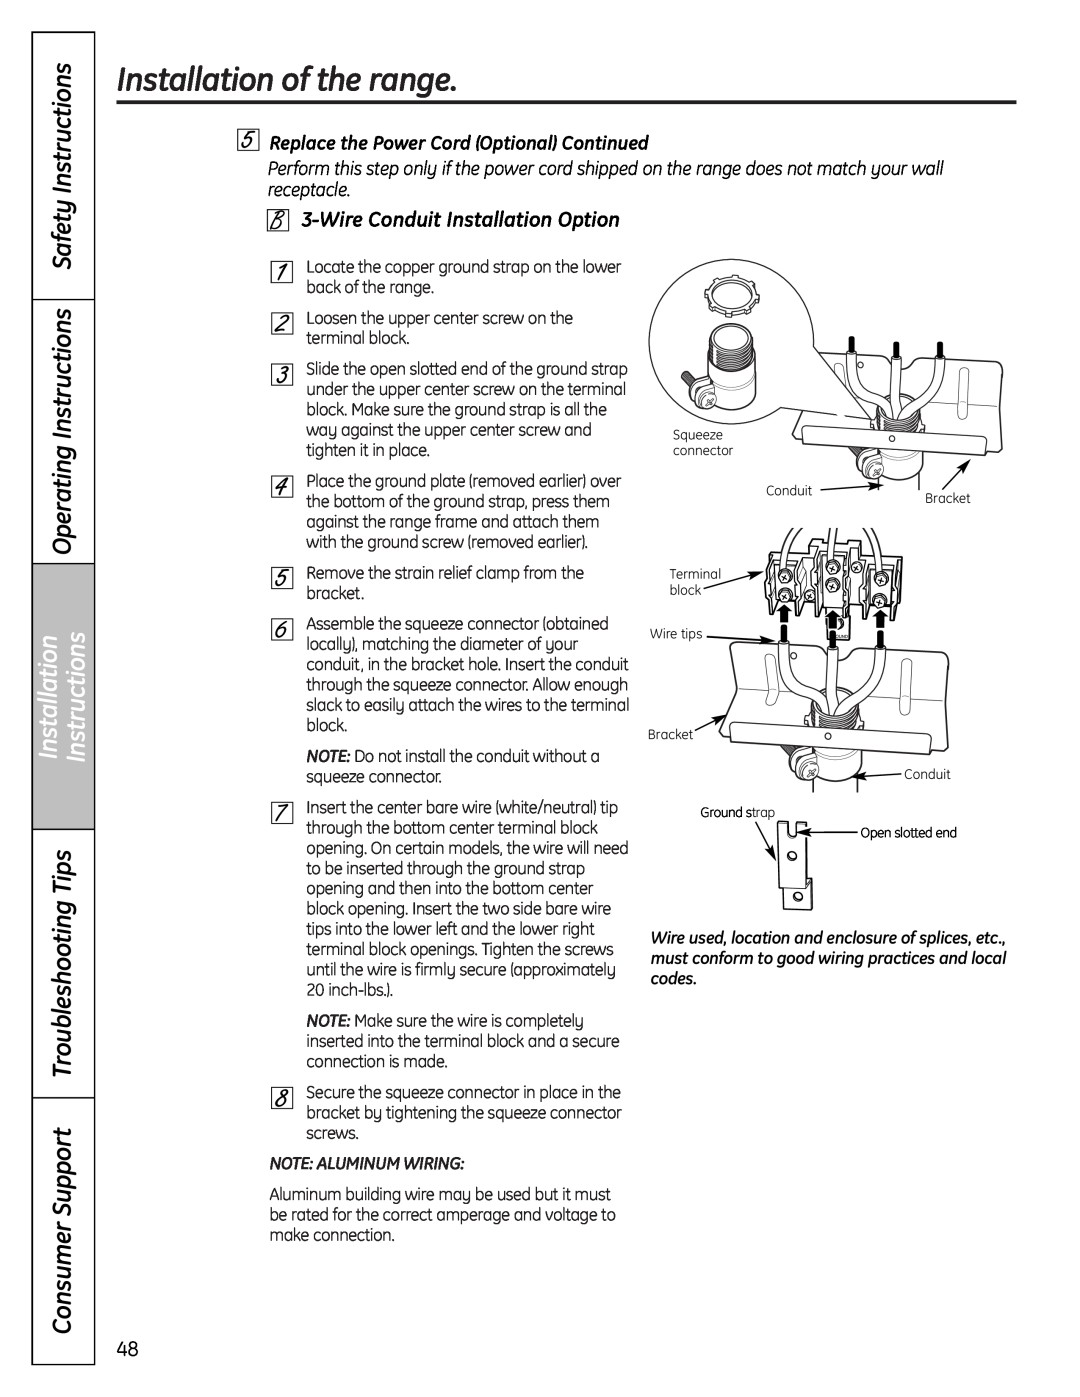 GE P2B918 Wire Conduit Installation Option, Installation of the range, Operating Instructions Safety 